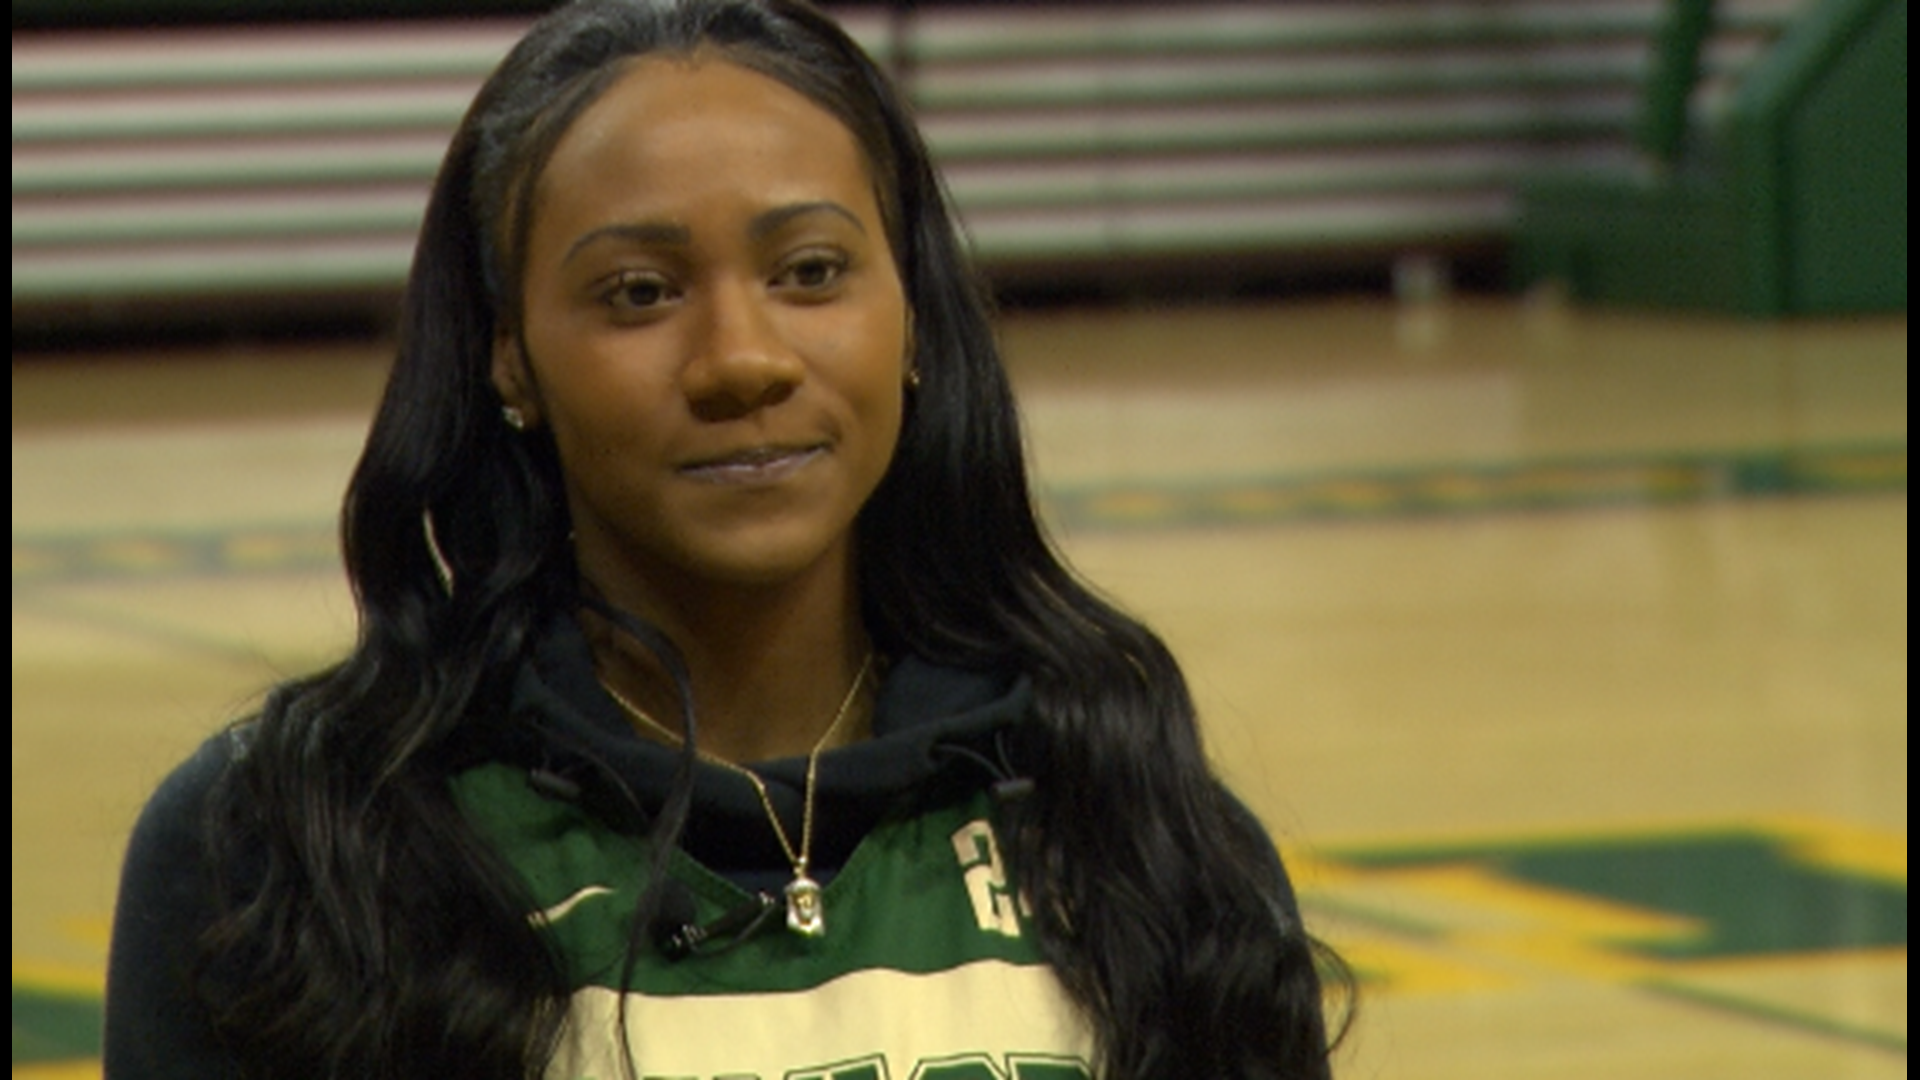 After graduating from LSU, Chloe Jackson had one goal in mind: Find a spot where she could contend for a national championship. When she met with head coach Kim Mulkey, she knew playing for the Lady Bears would be a once in a lifetime experience.